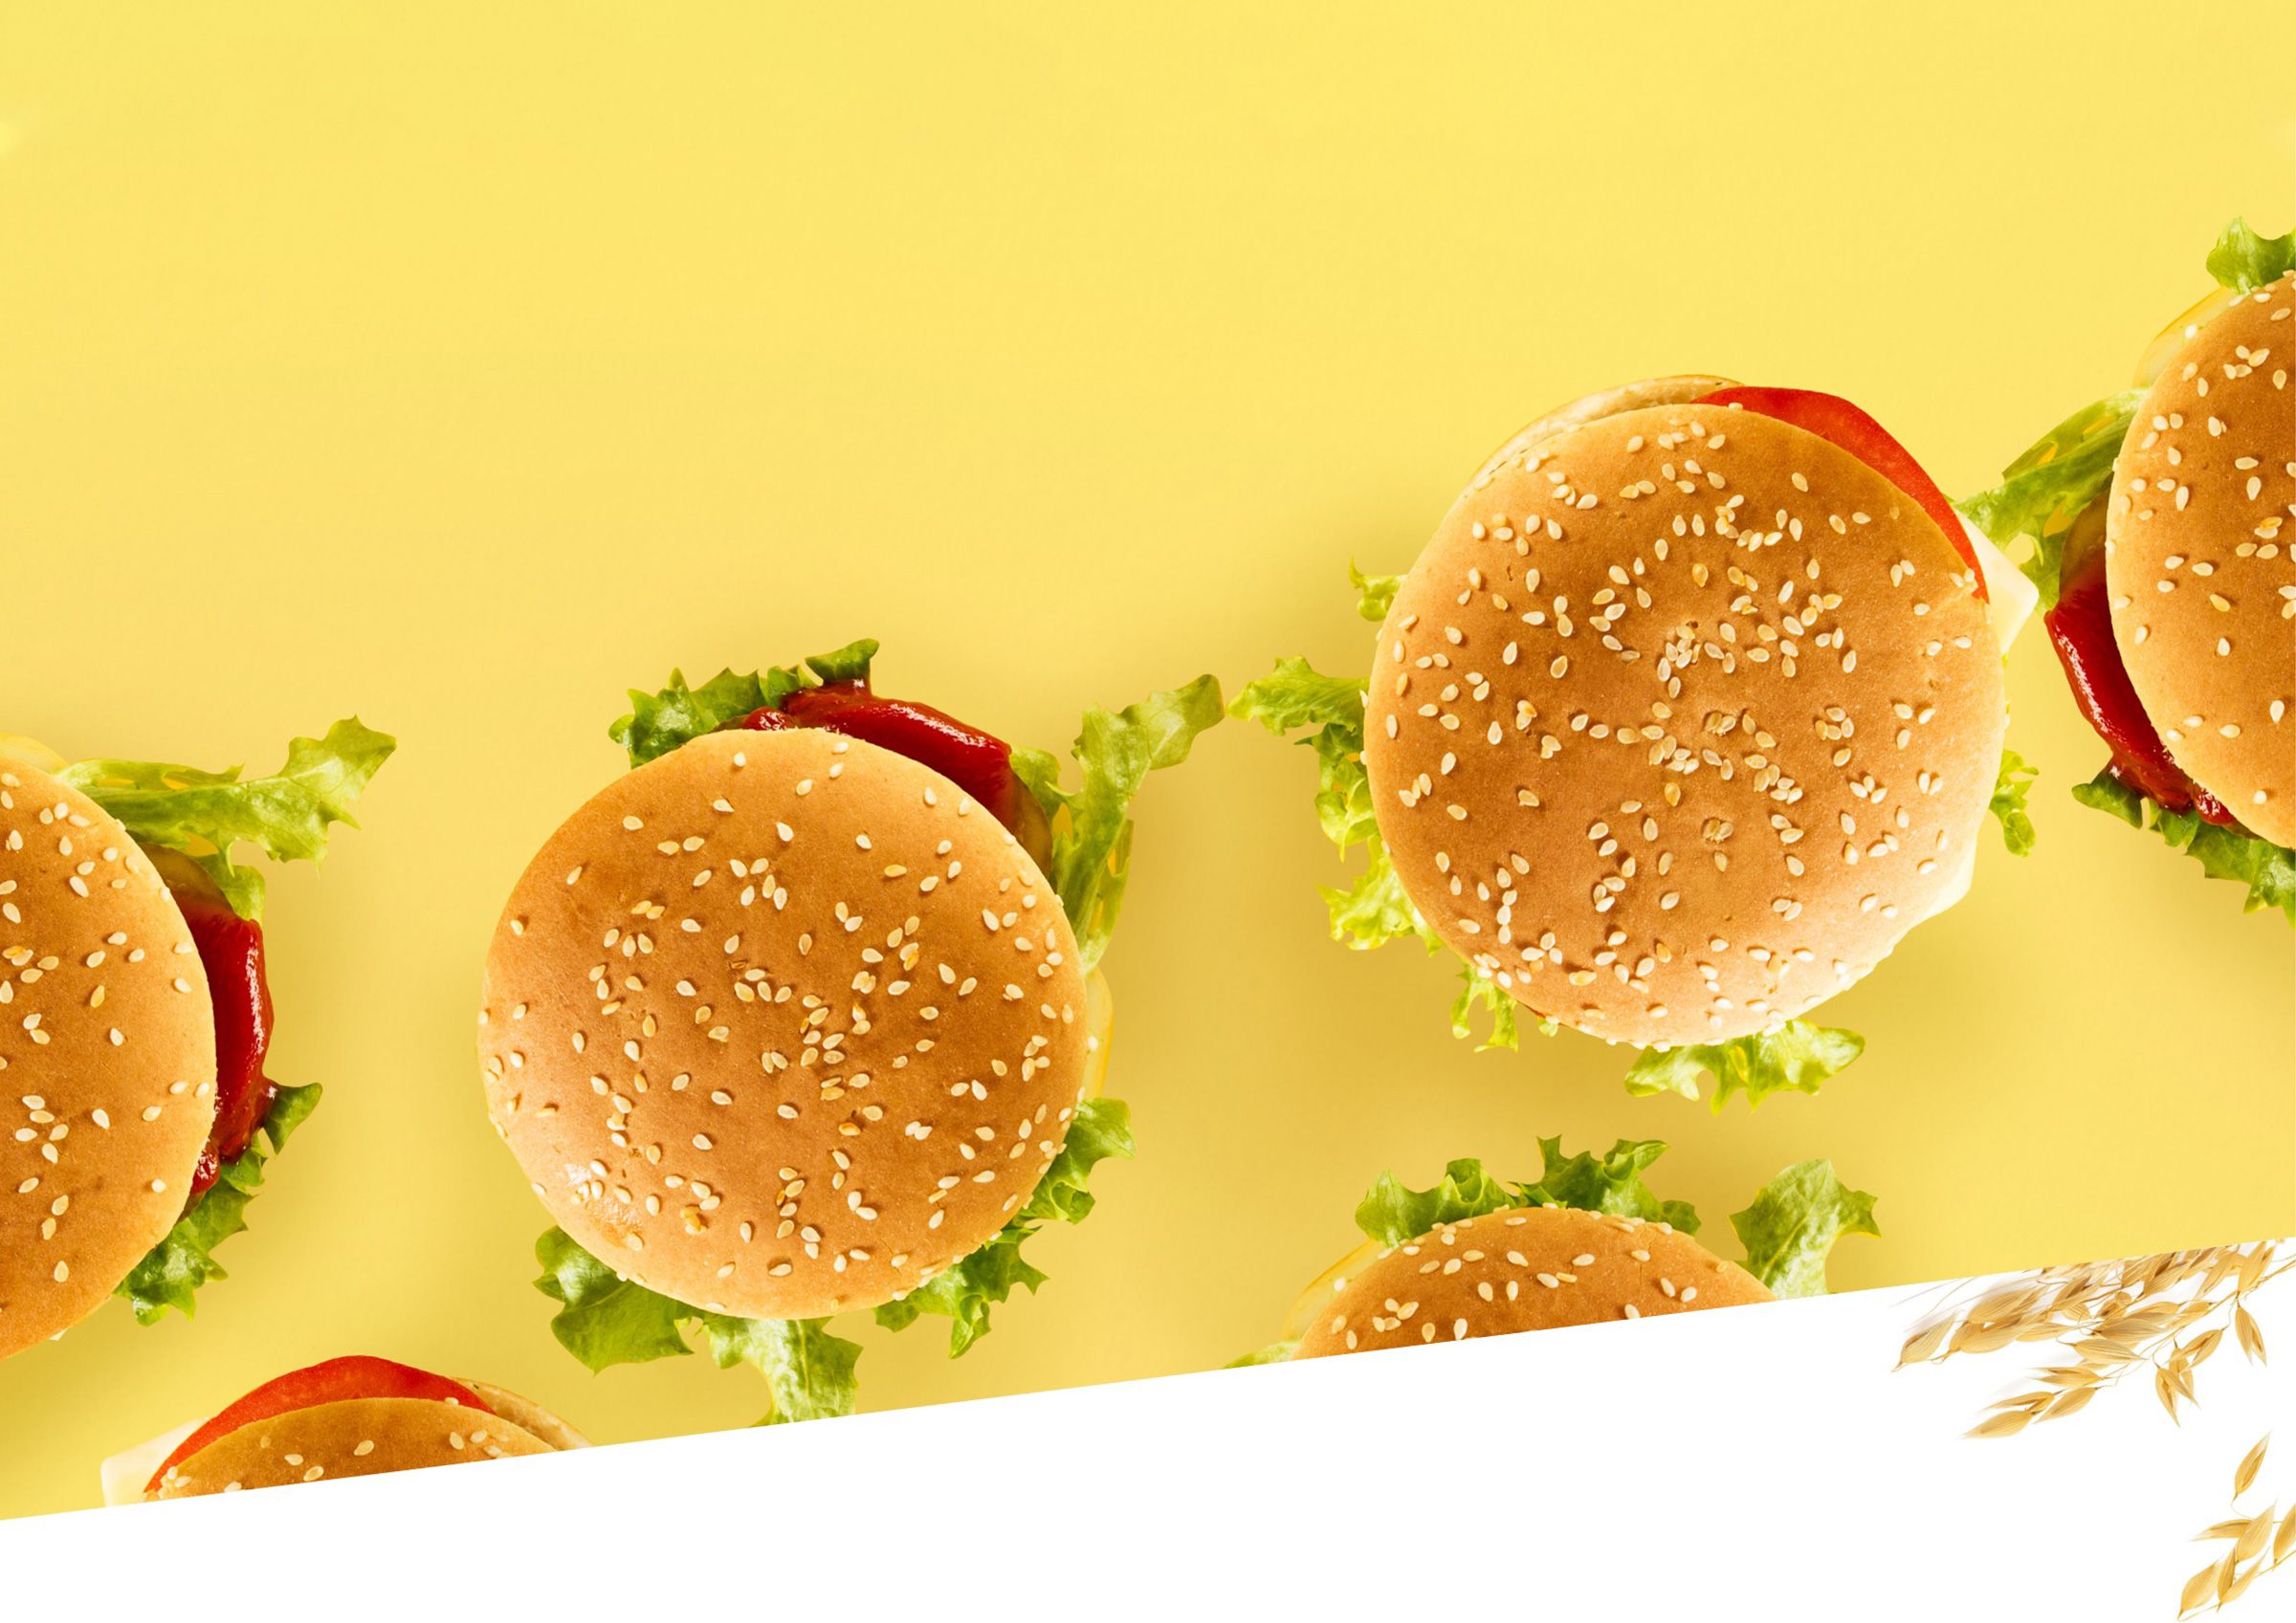 Burgers with sesame seed buns on yellow surface.